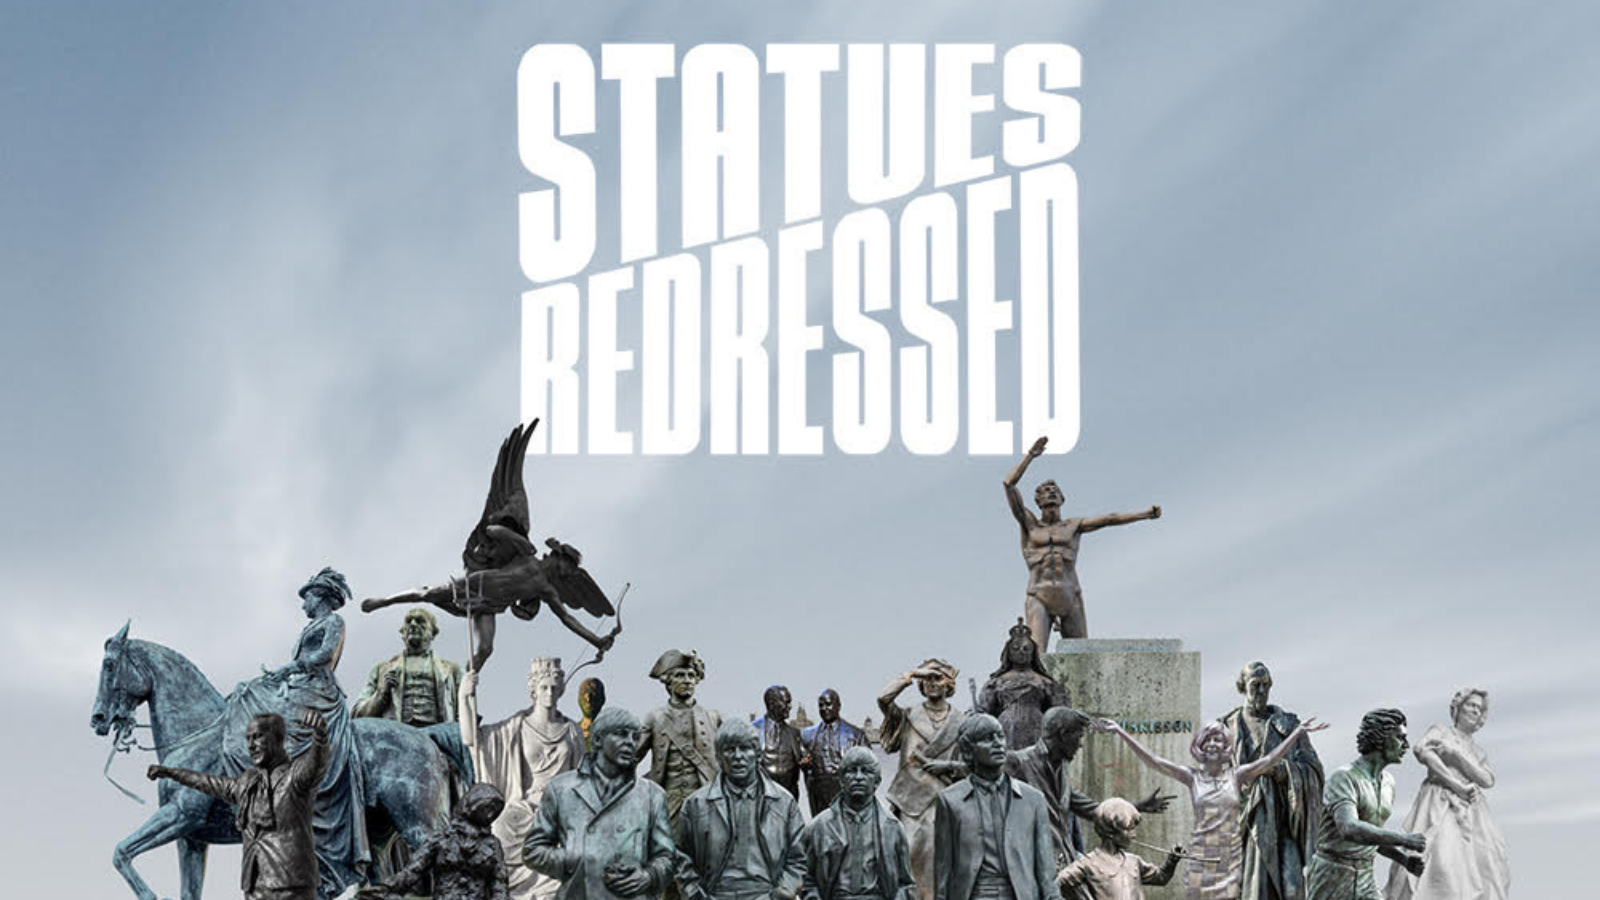 Statues Redressed featured image